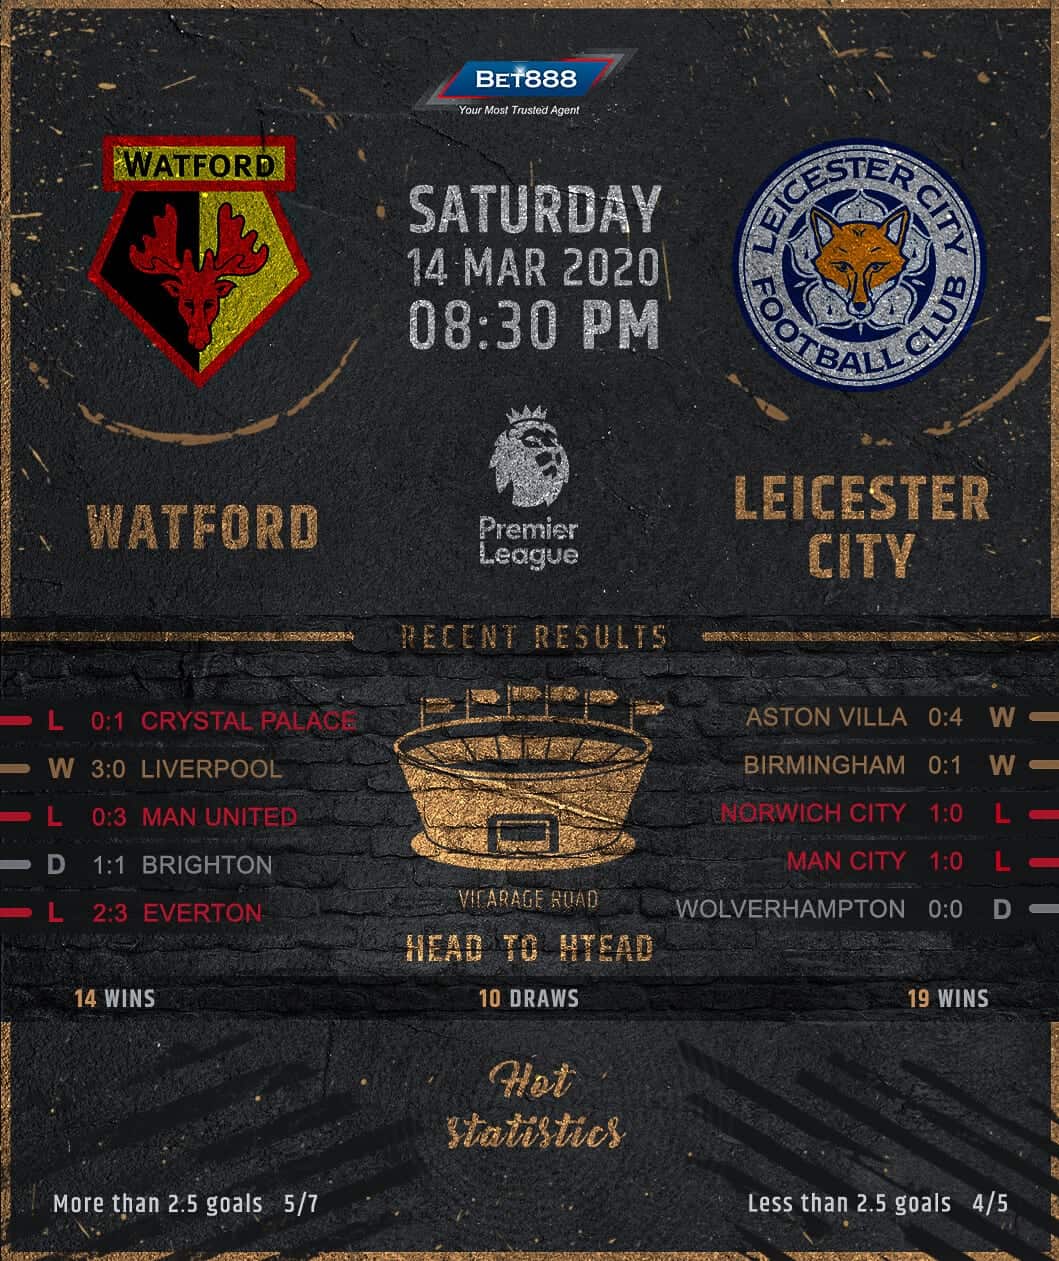 Watford vs Leicester City﻿ 14/03/20